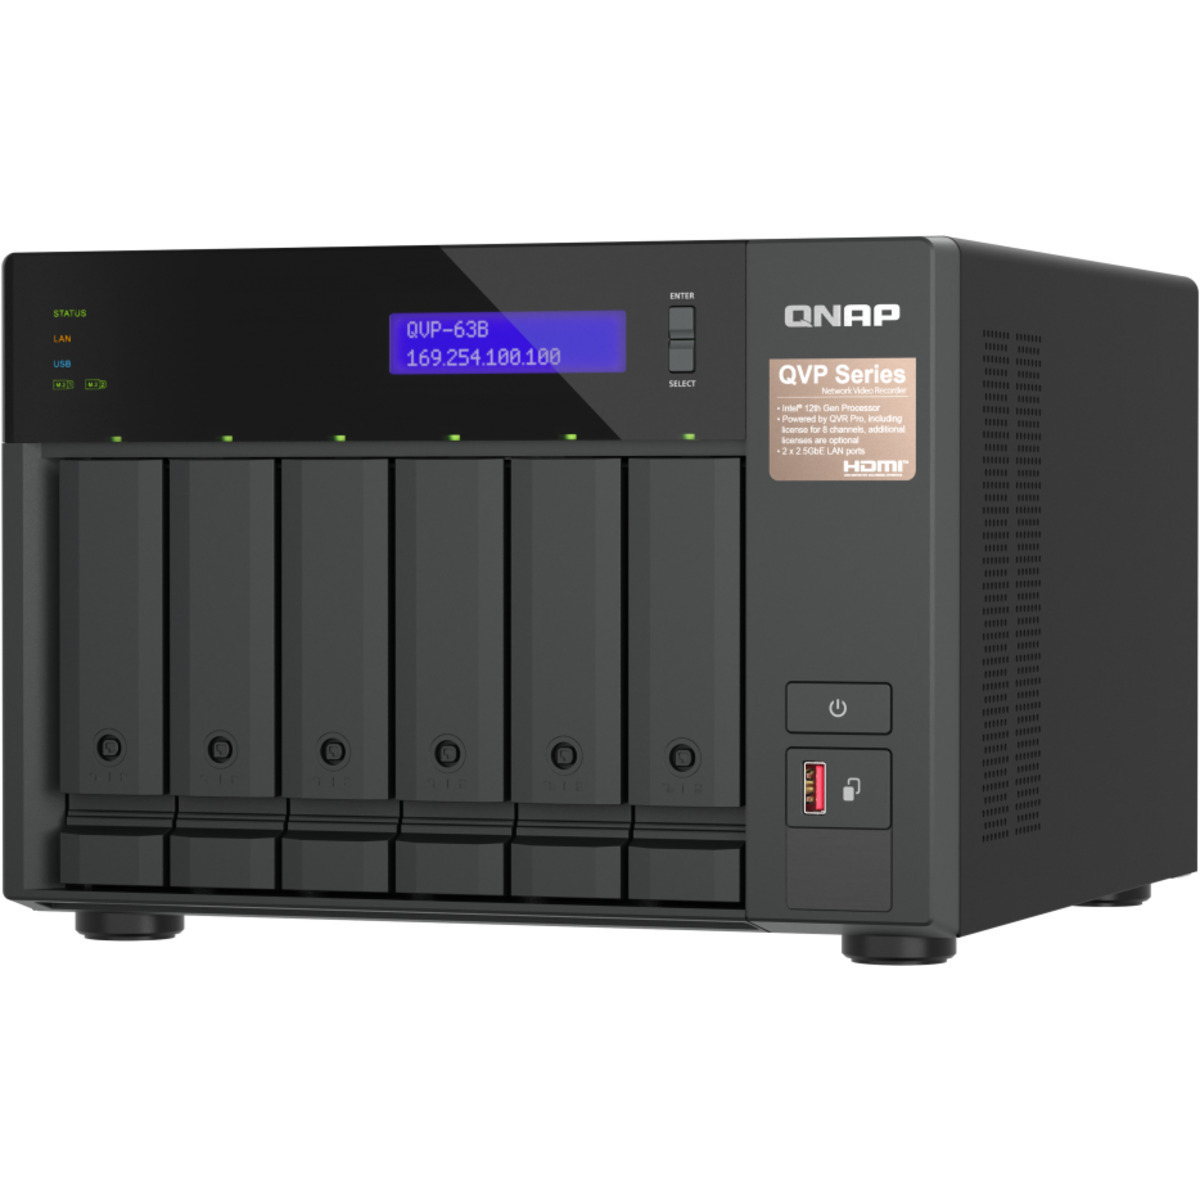 buy QNAP QVP-63B 12tb Desktop NVR - Network Video Recorder 6x2000gb Seagate IronWolf Pro ST2000NT001 3.5 7200rpm SATA 6Gb/s HDD NAS Class Drives Installed - Burn-In Tested - nas headquarters buy network attached storage server device das new raid-5 free shipping simply usa QVP-63B